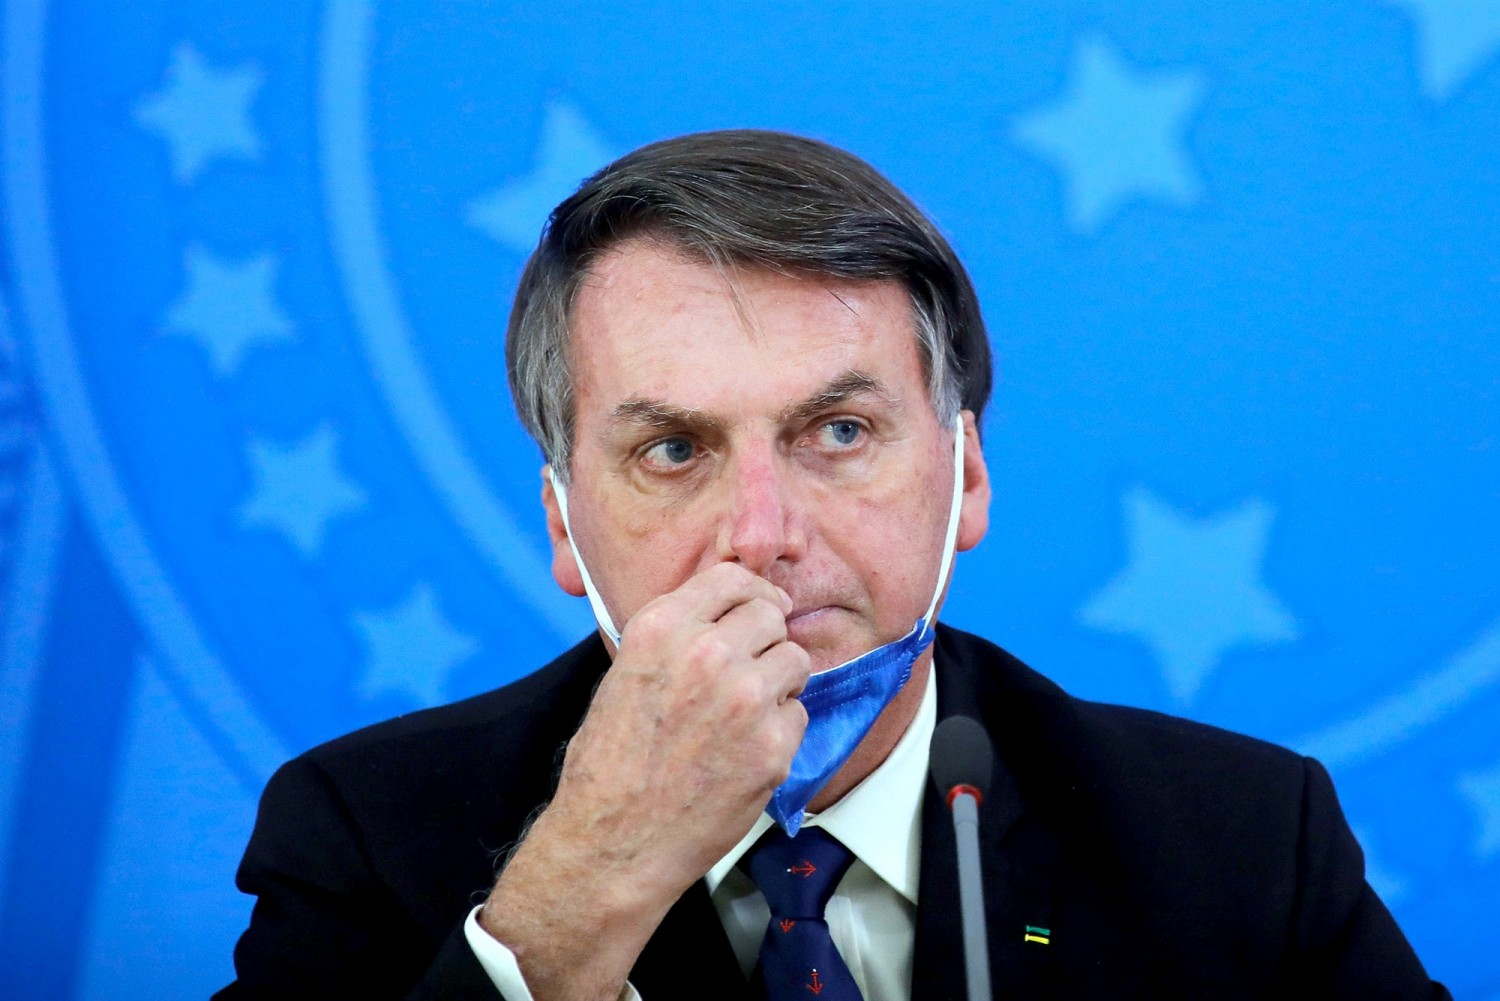 Brazilian President Jair Bolsonaro during a news conference on the coronavirus pandemic at the Planalto Palace in Brasilia on March 20, 2020.Sergio Lima / AFP - Getty Images file